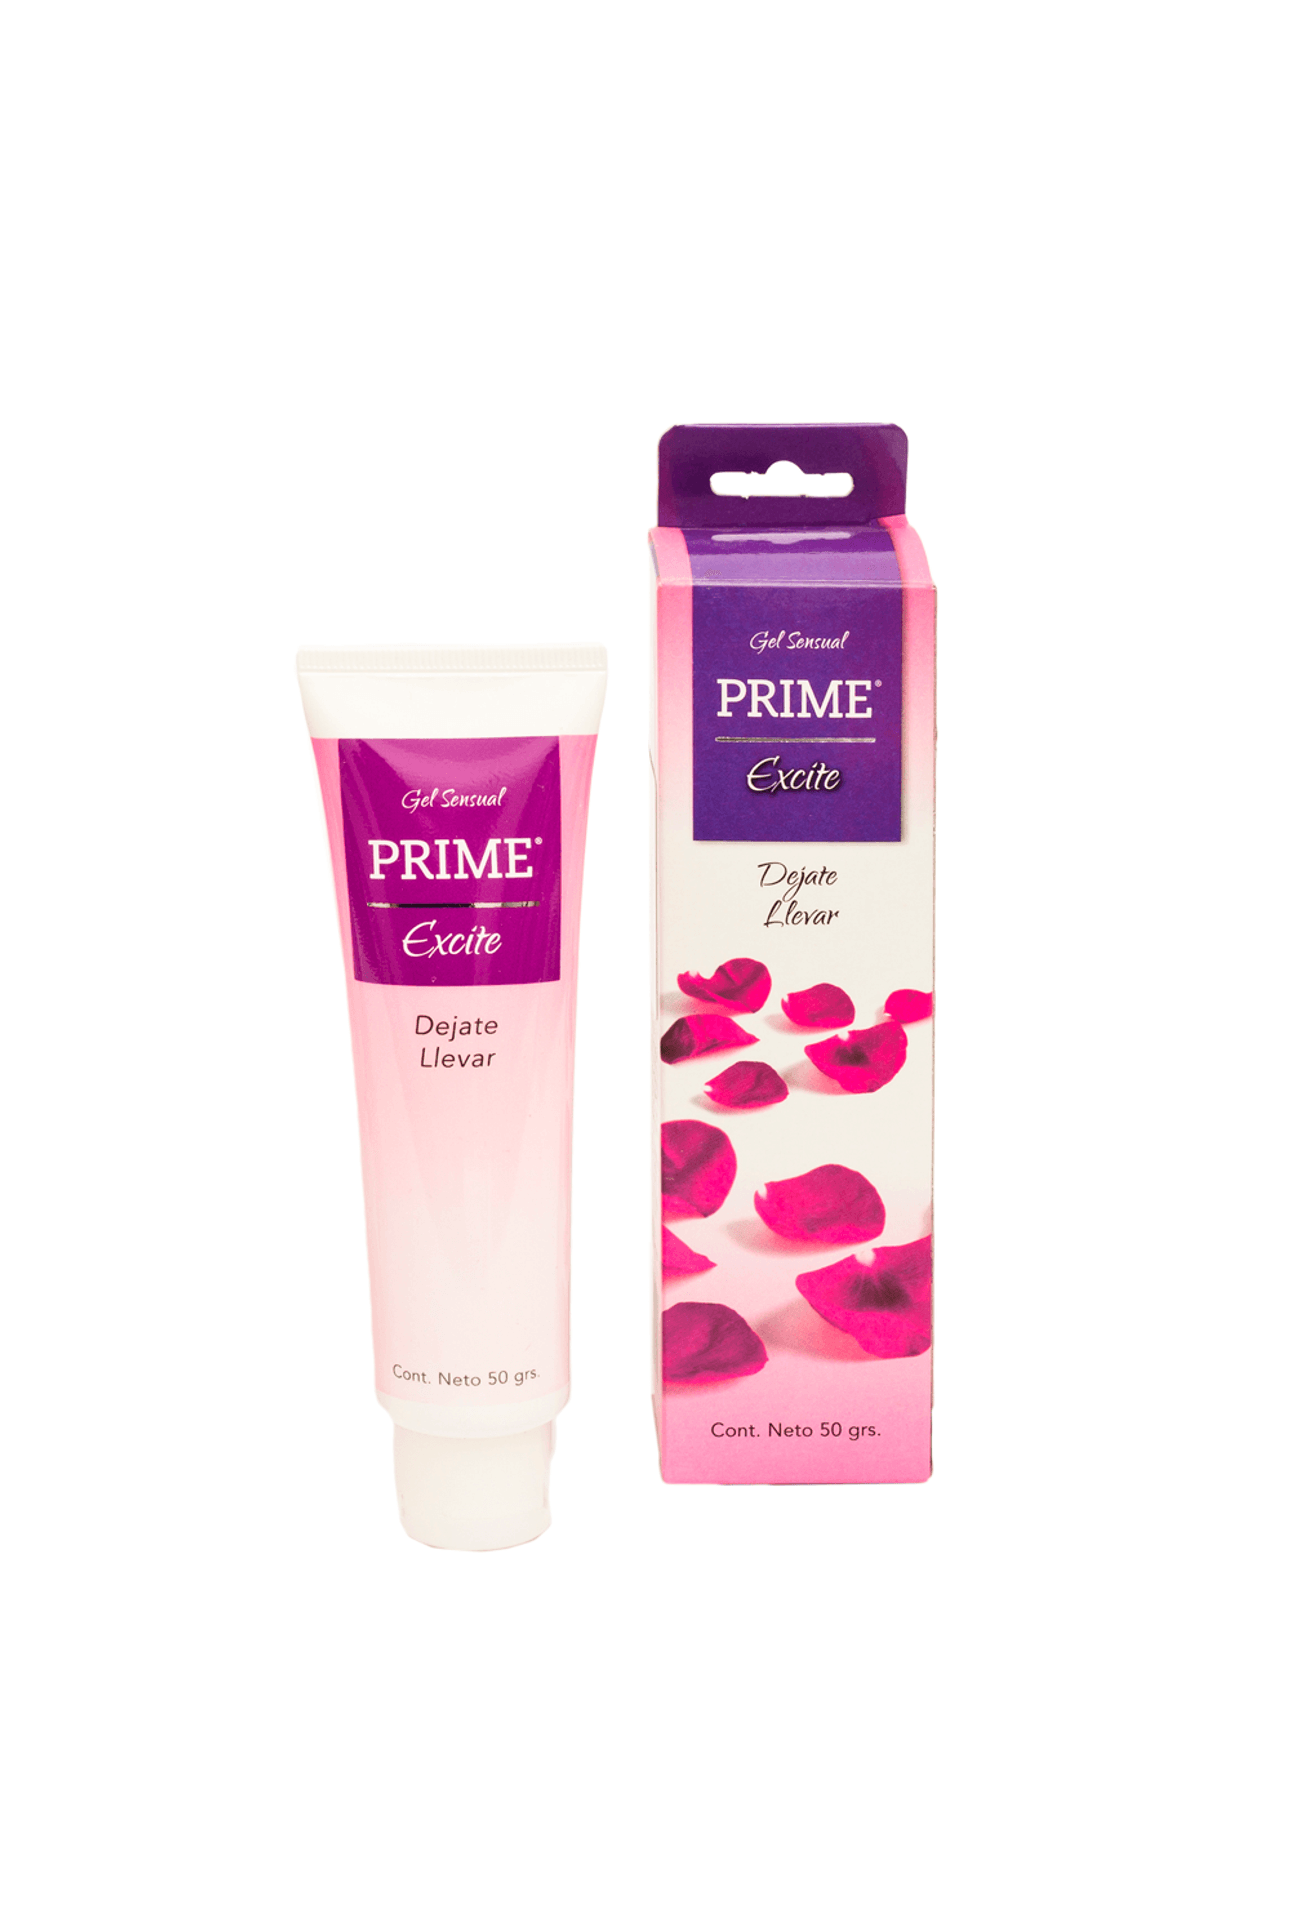 Prime-Gel Intimo Excite x 50 gr-7791519001444